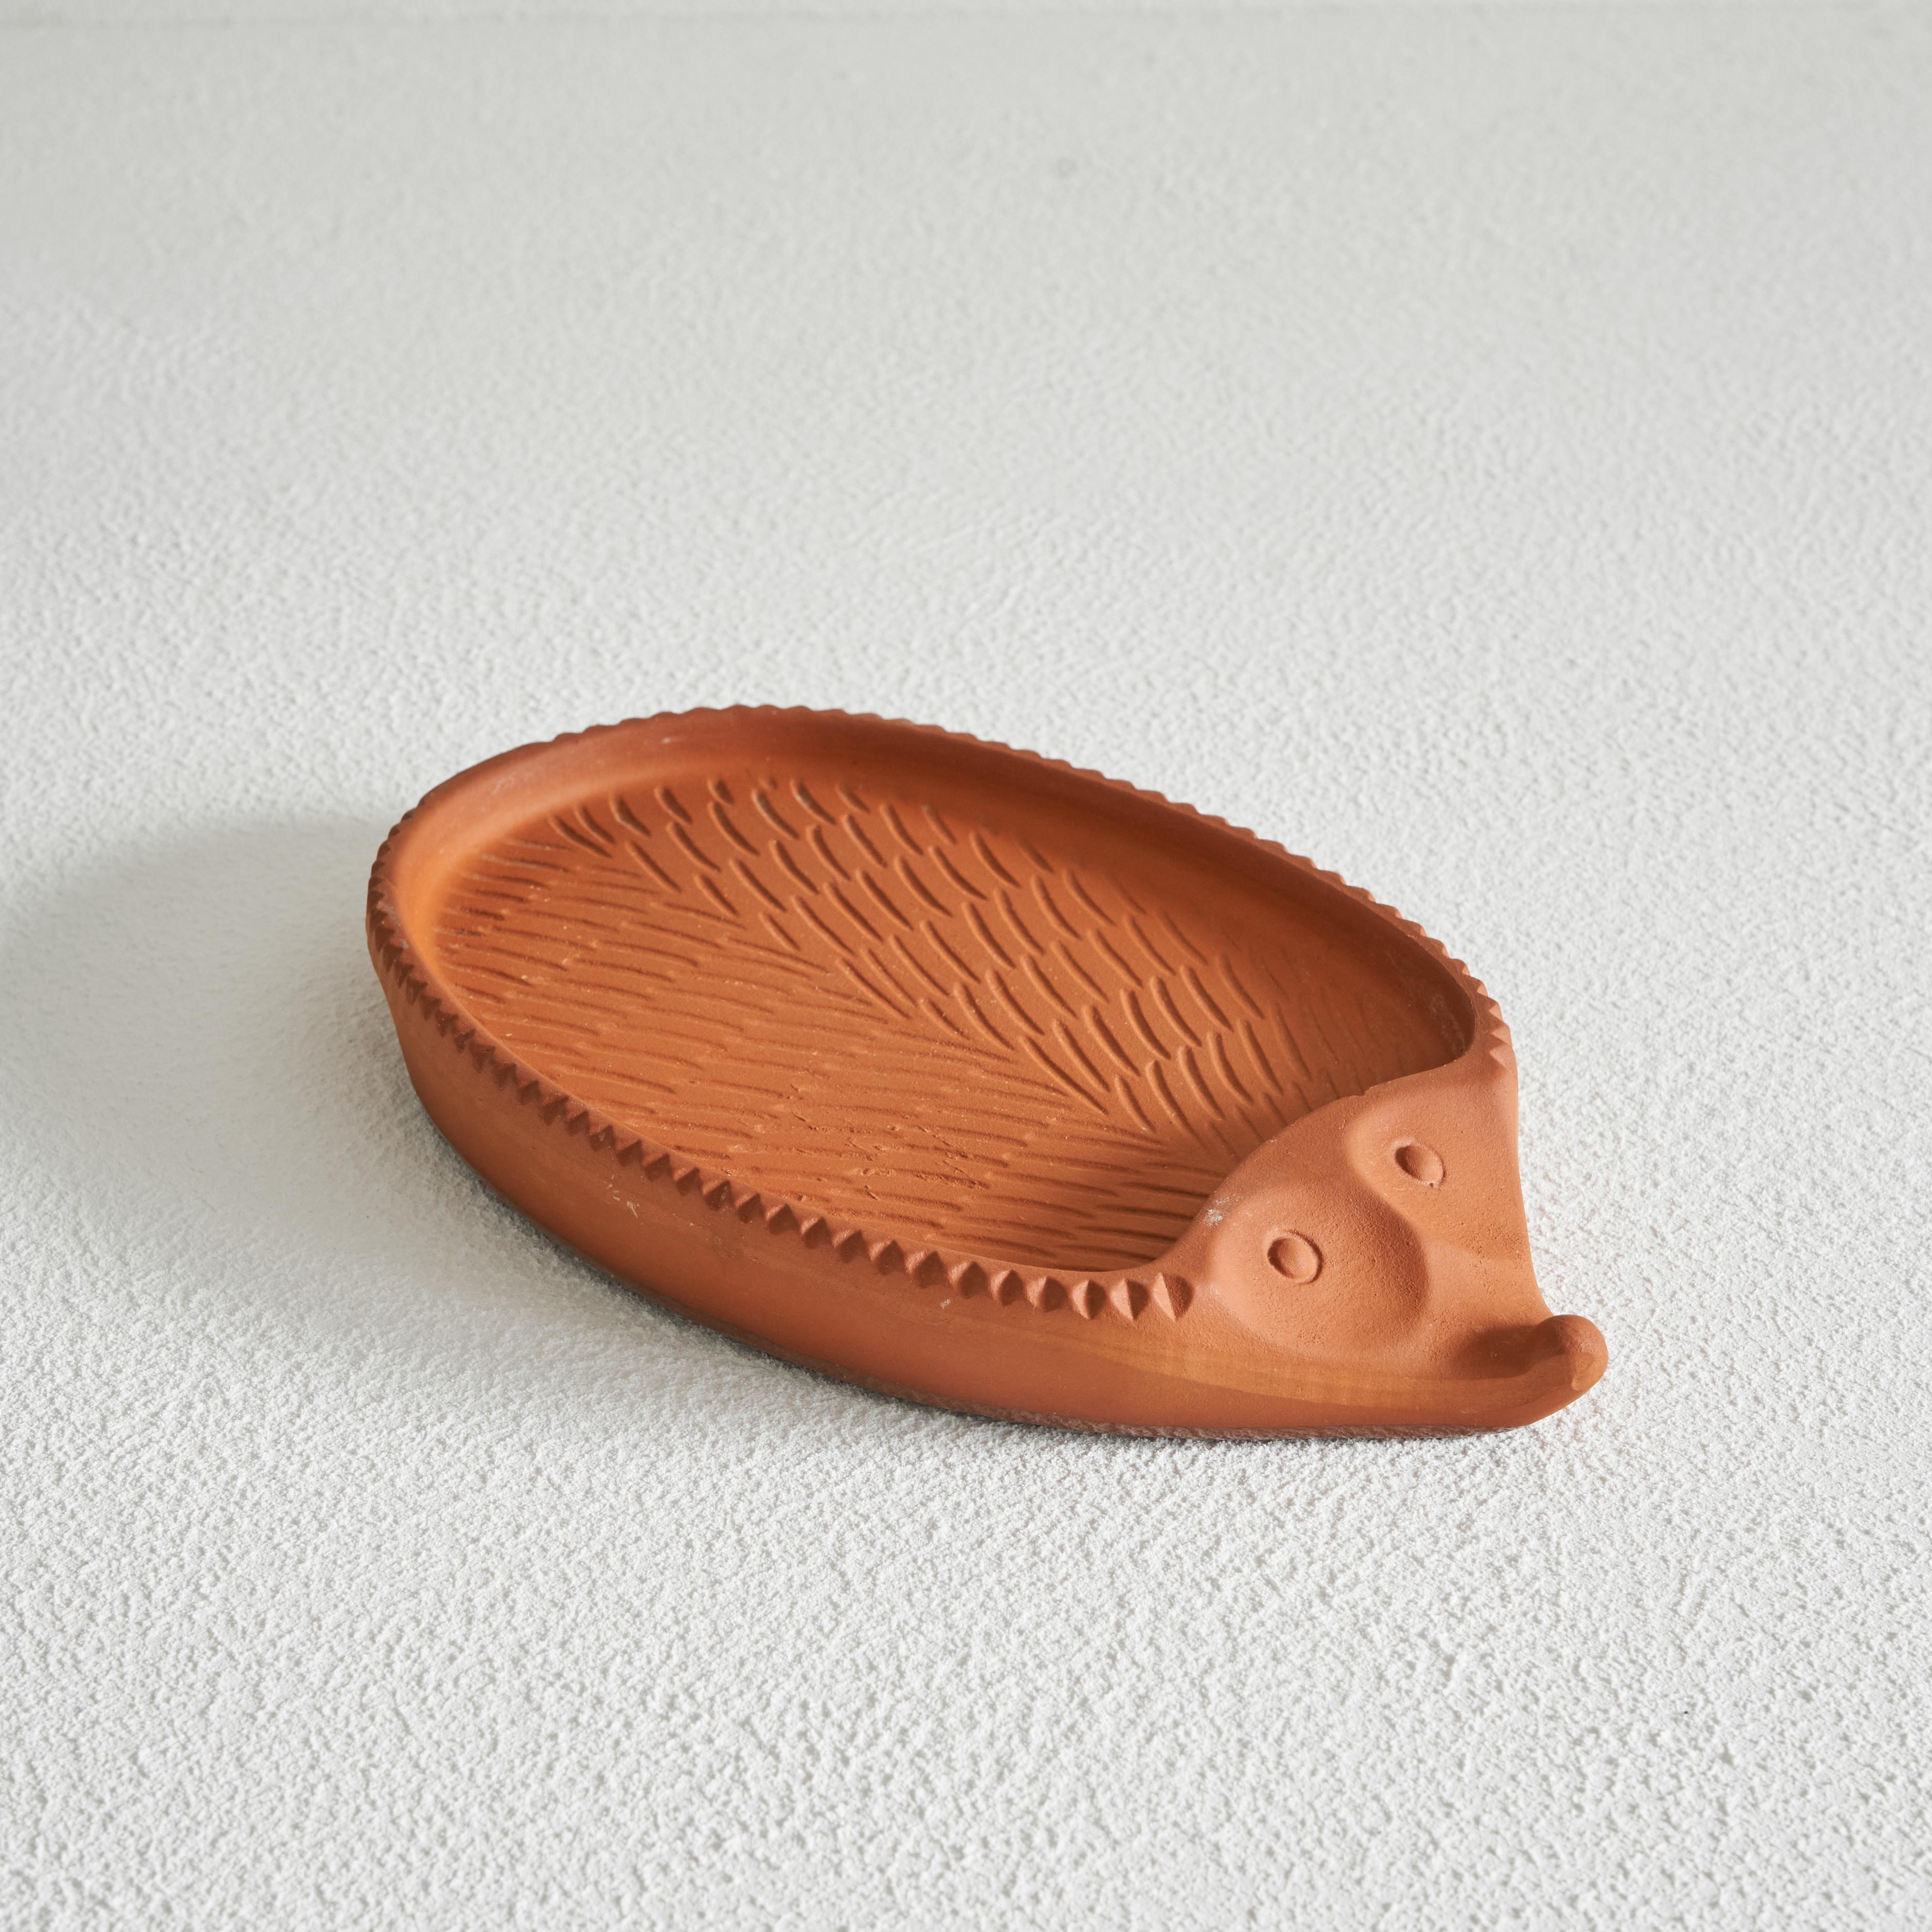 Fun and elegant ‘Hedgehog’ plate or bowl in terracotta, (West) Germany, mid 20th century.

This is a wonderful and fun piece of terracotta pottery. Originally meant for growing cress or watercress, this bowl is a joyful piece of vintage